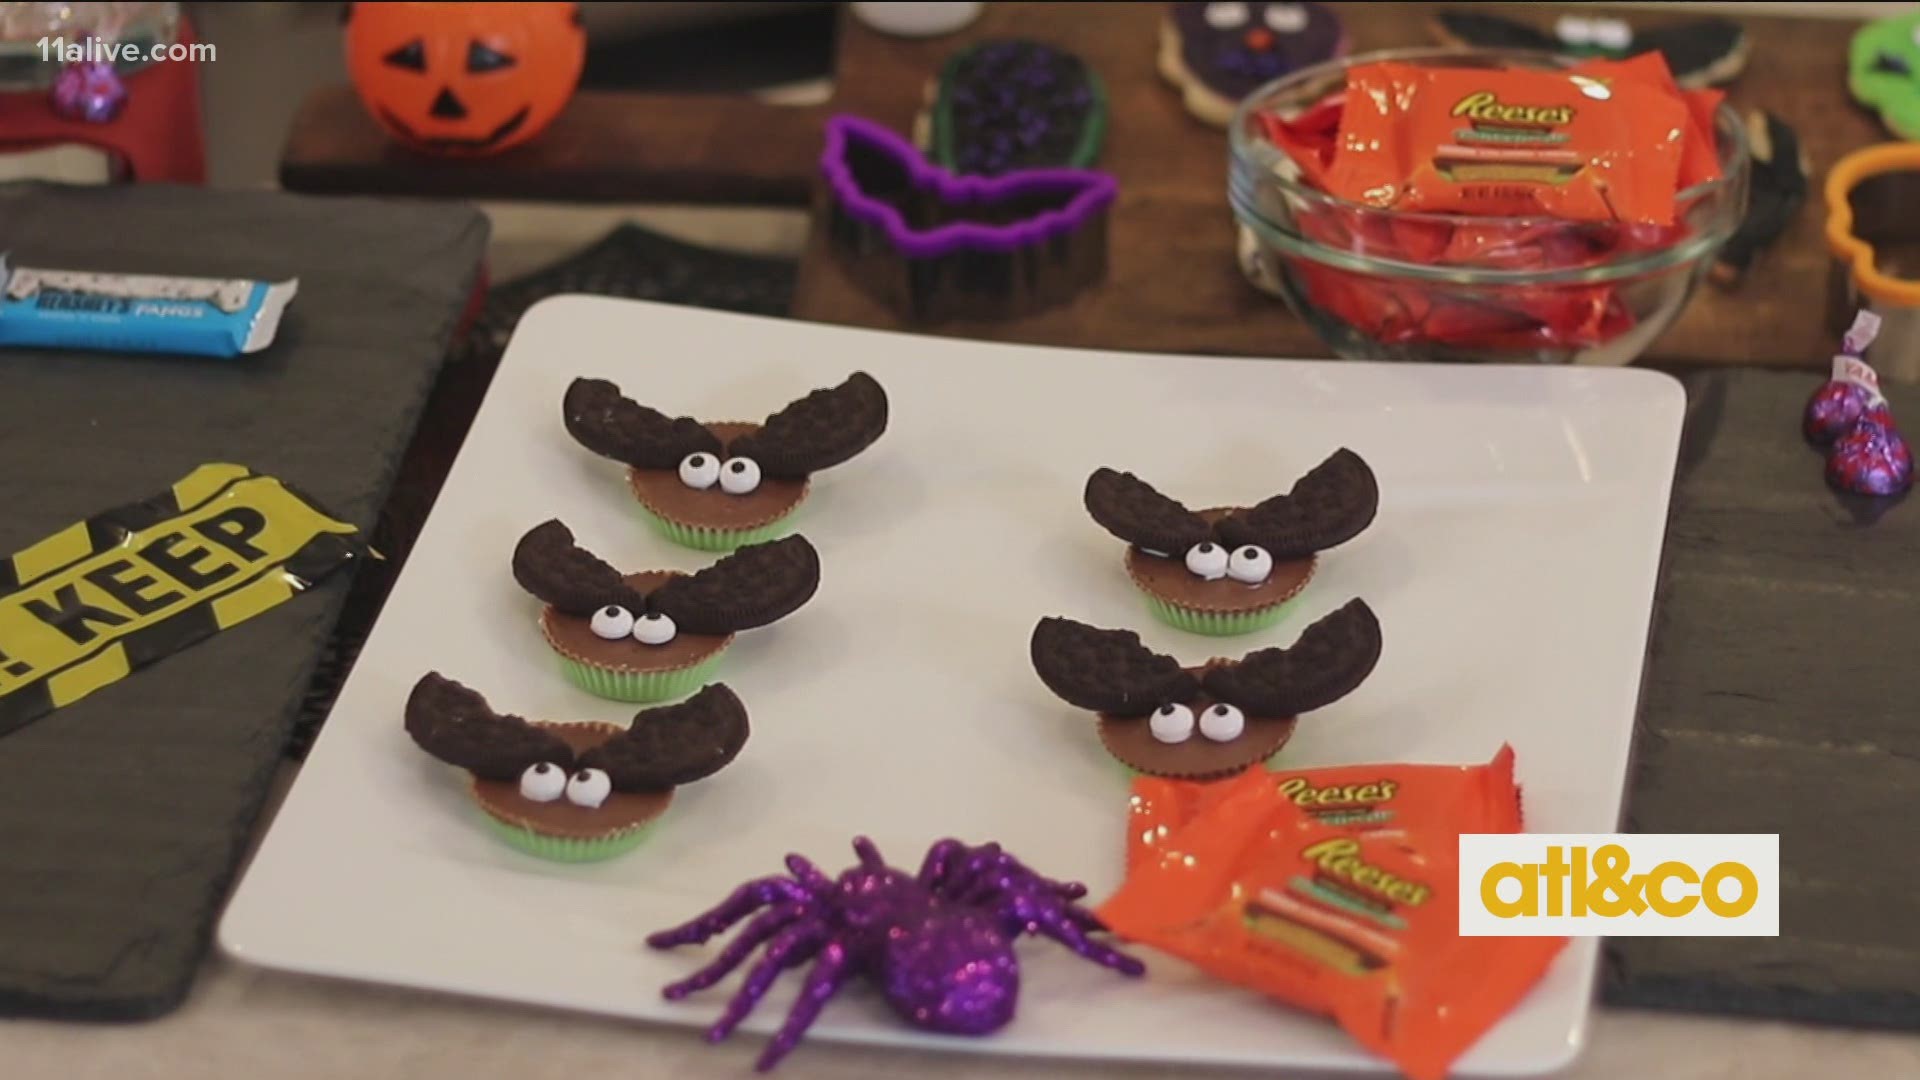 Food and lifestyle expert Justine Santaniello shares spooky Hershey's Halloween treats perfect for your trick-or-treaters.